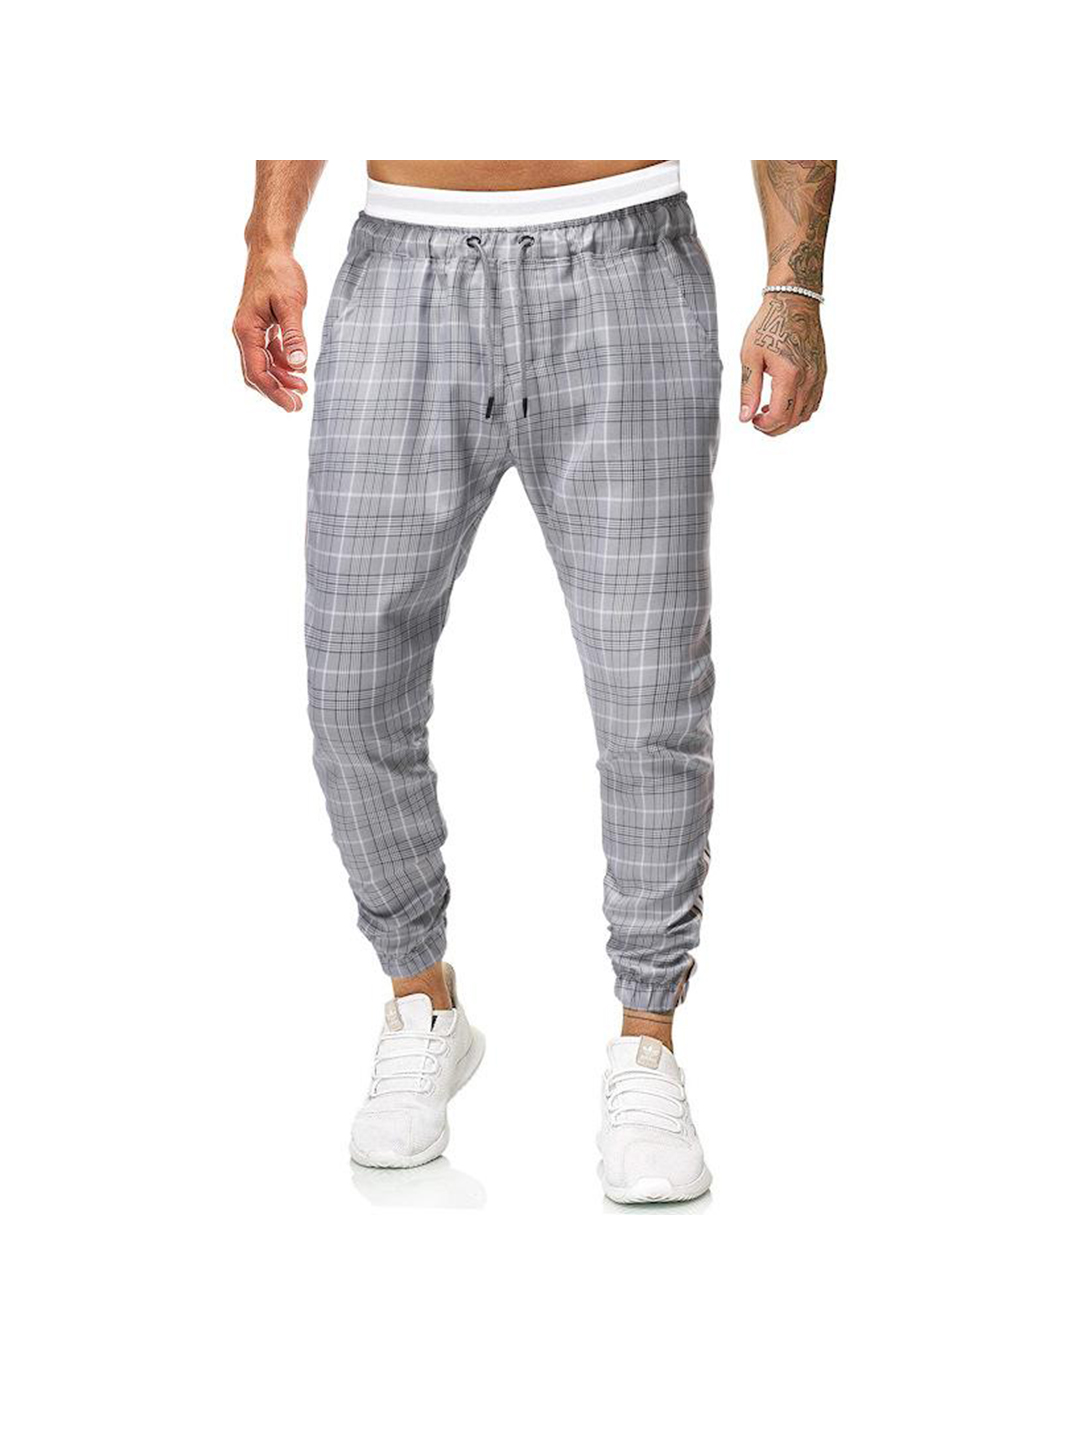 Henry Printed Houndstooth Casual Jogger